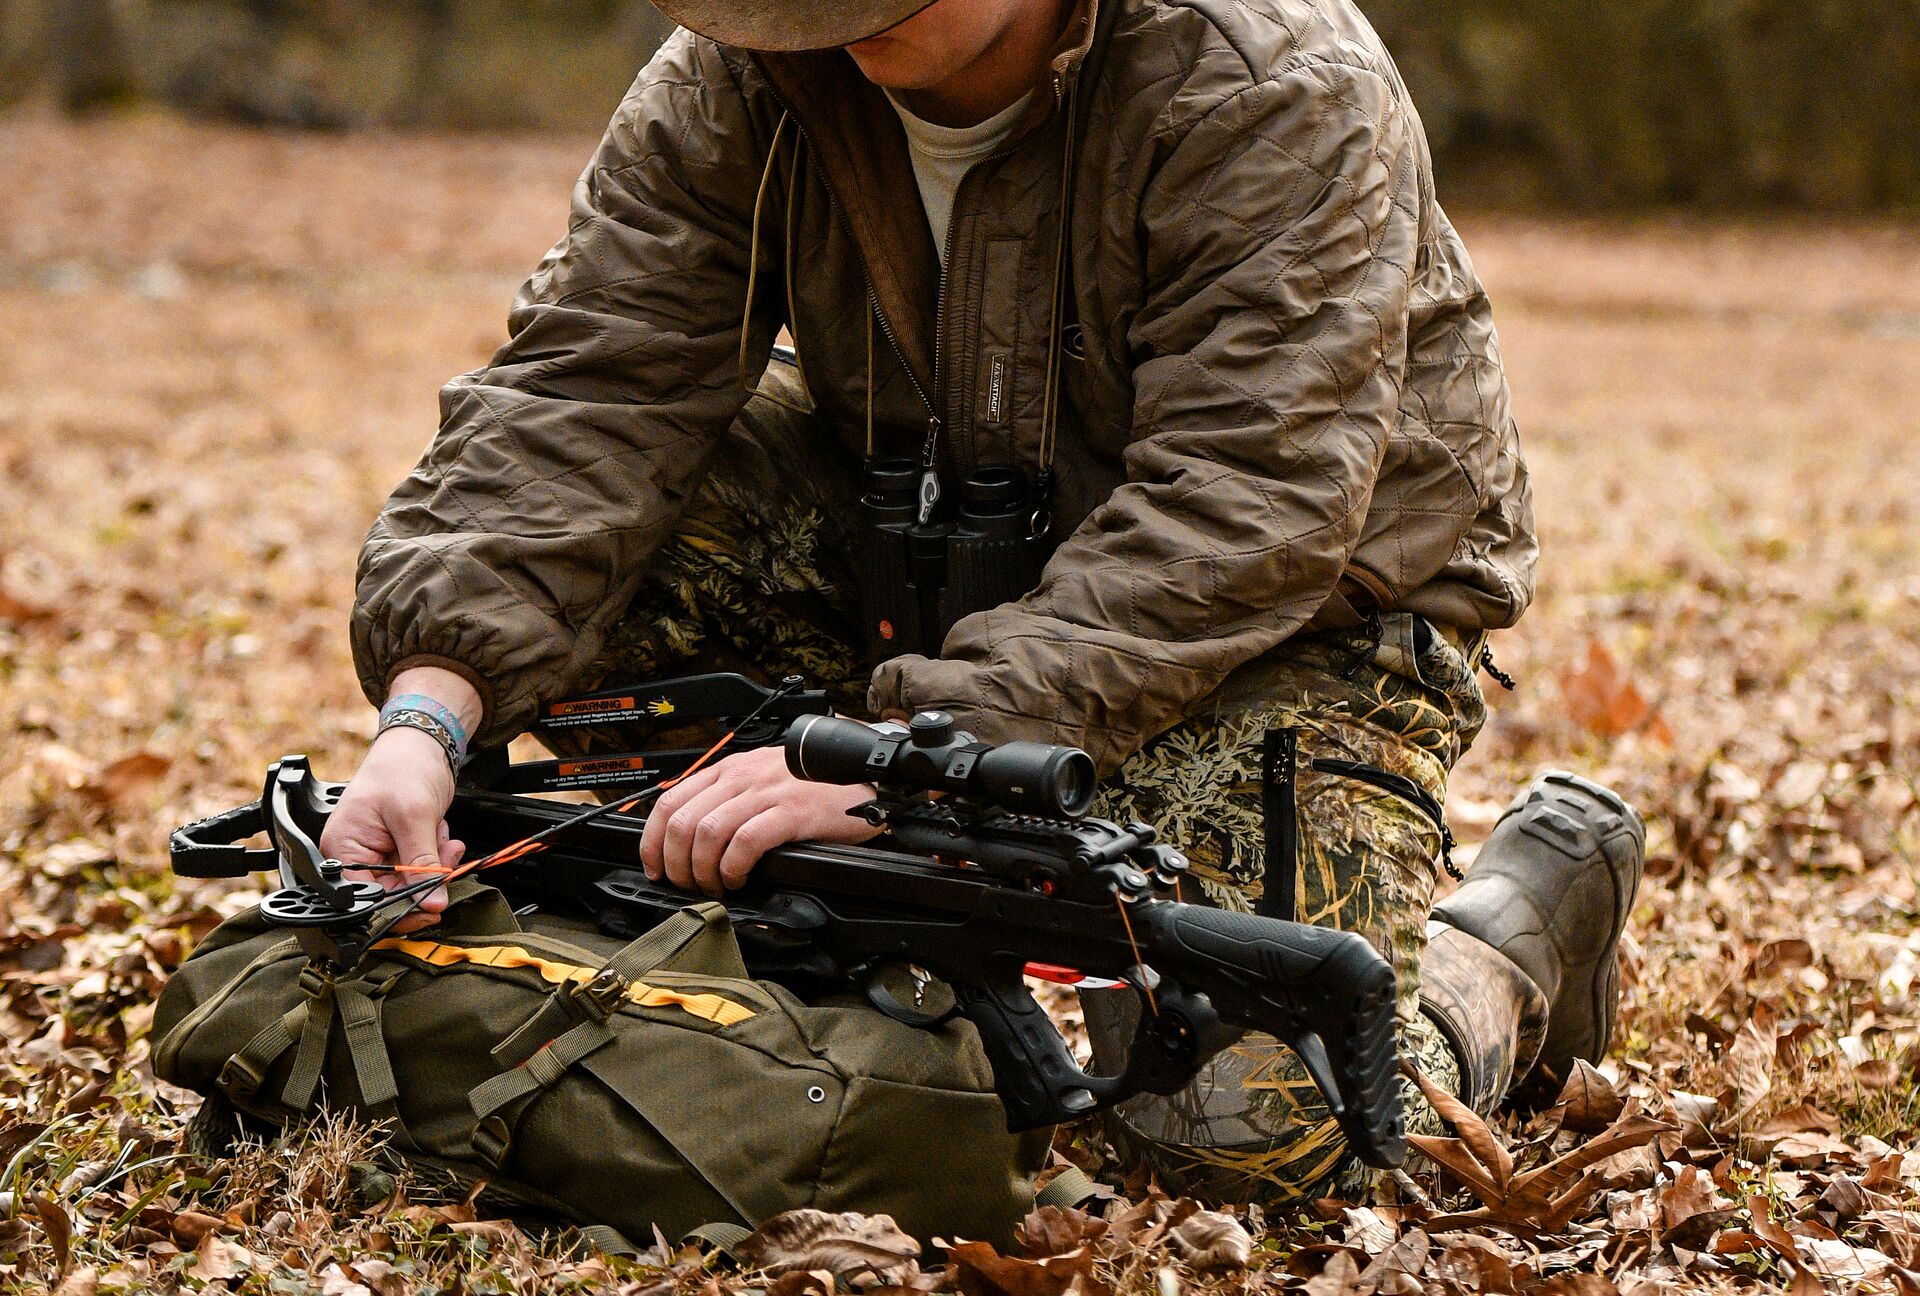 A hunter handles a crossbow while kneeling on the ground